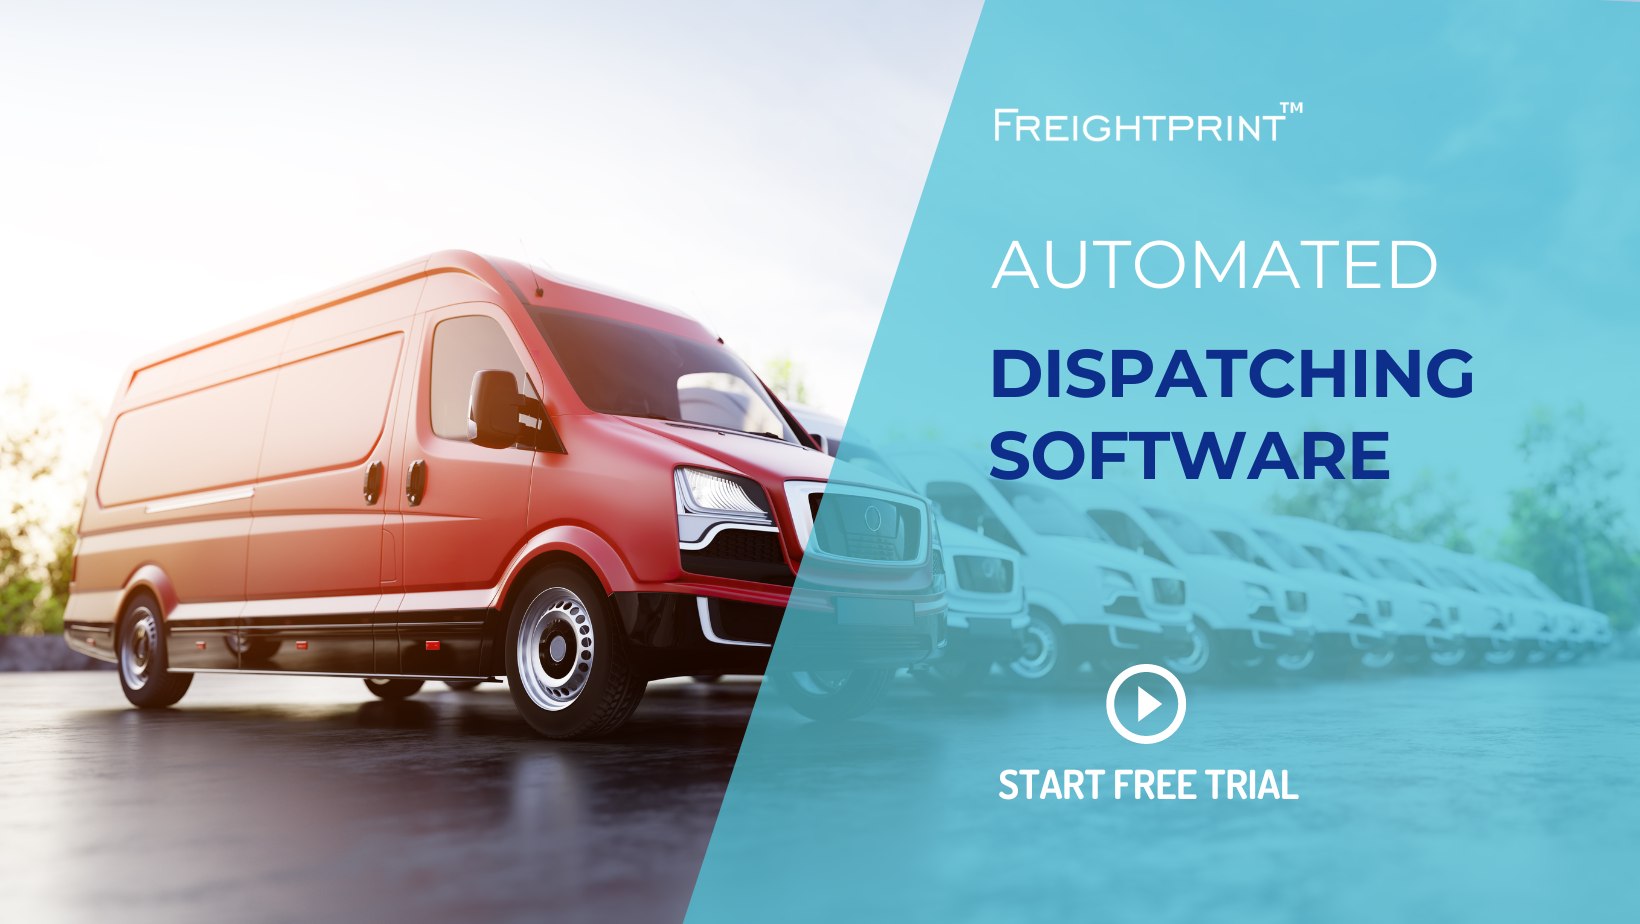 https://www.freightprint.com/blog/view/u/how-to-implement-automated-dispatching-in-your-operations